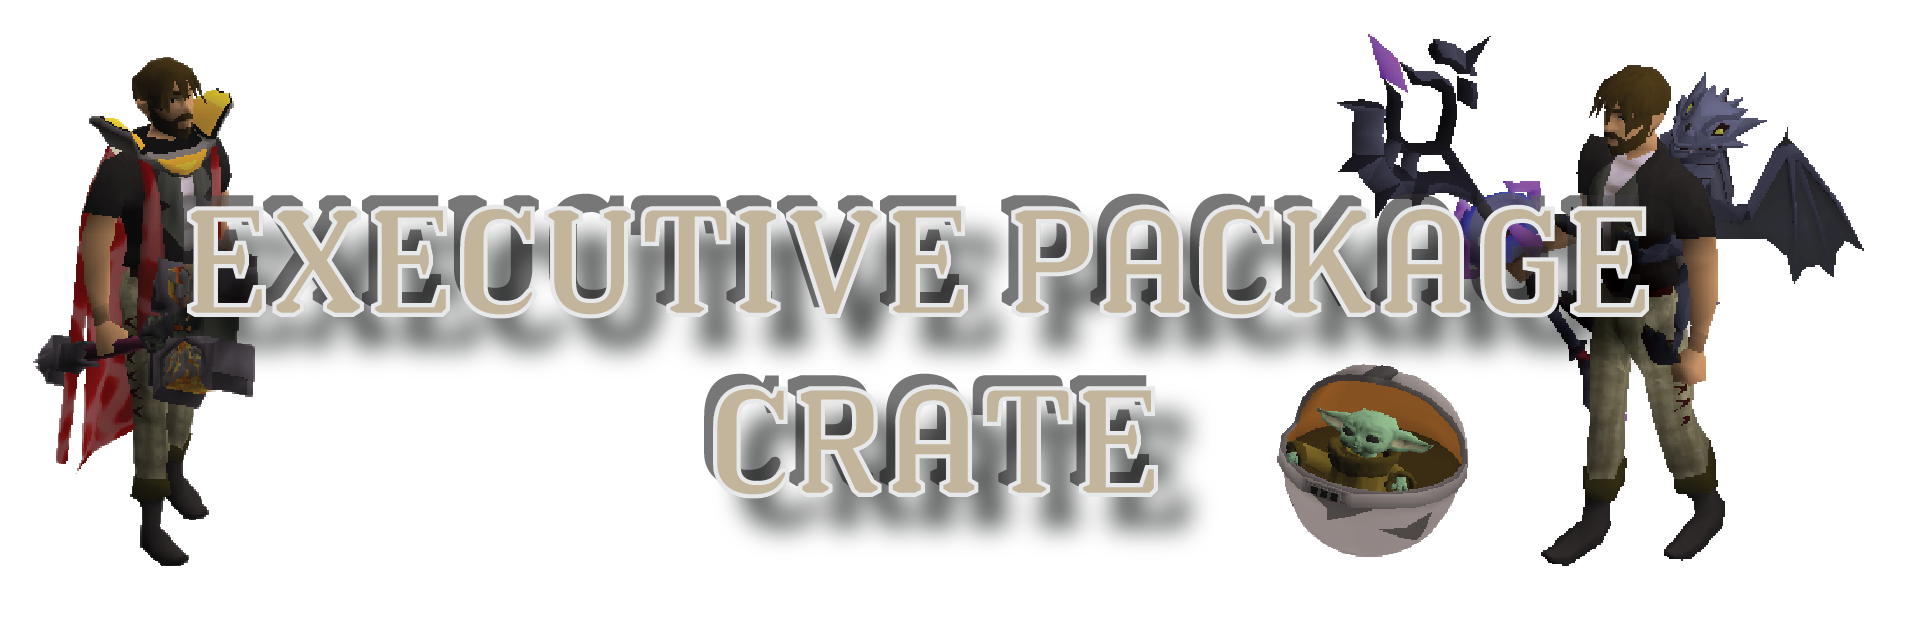 Executive Package Crate Banner.png